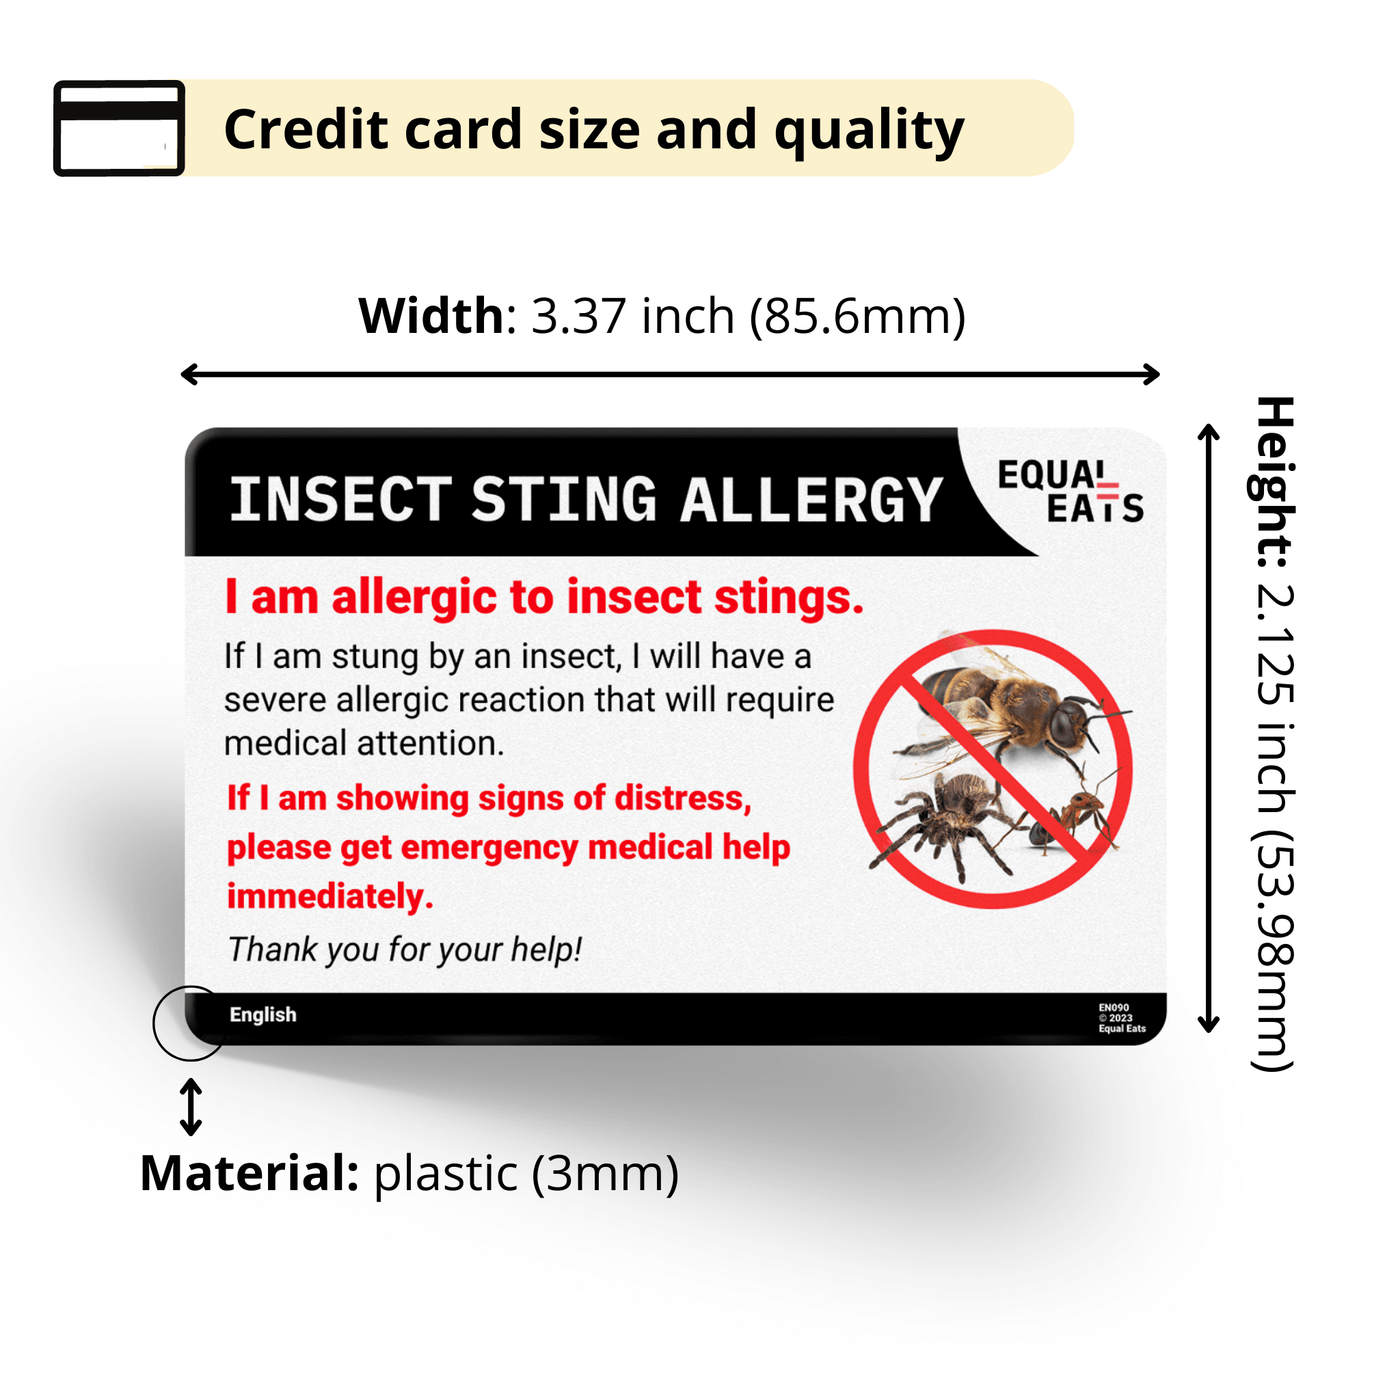 Spanish (Latin America) Insect Sting Allergy Card